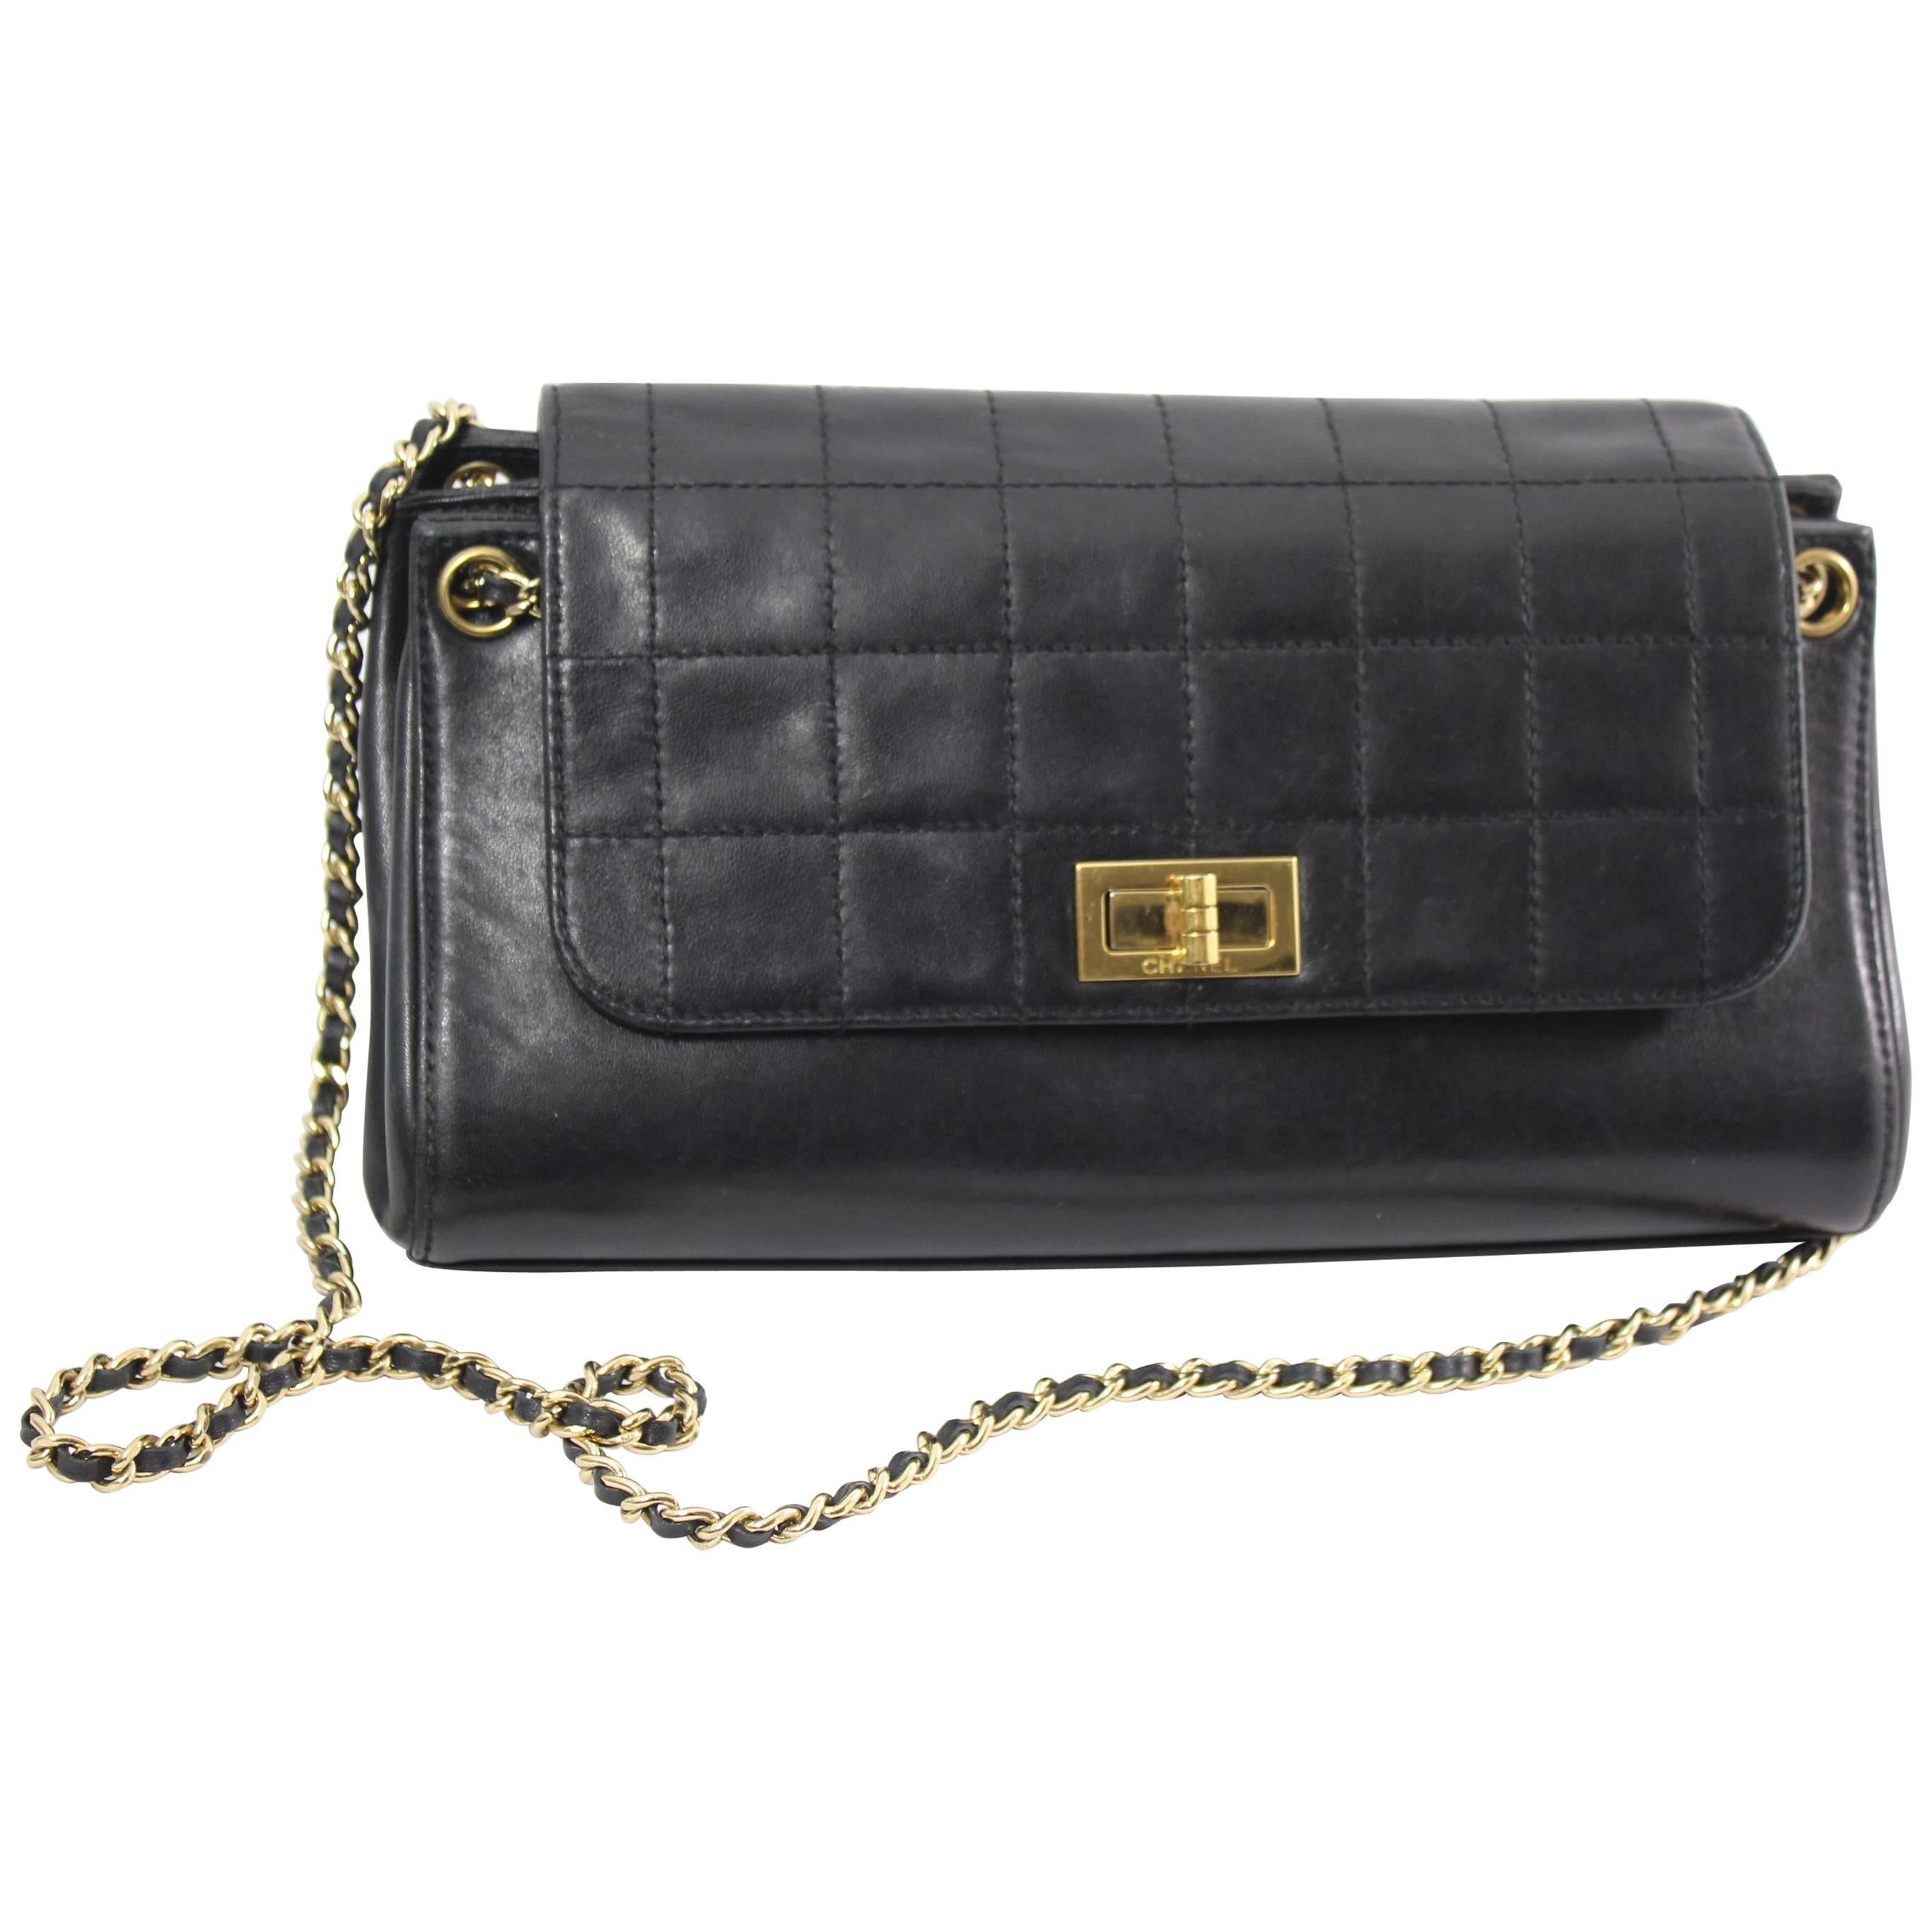 Chanel Black Quilted Lambskin Leather Shopper 2.55 Bag